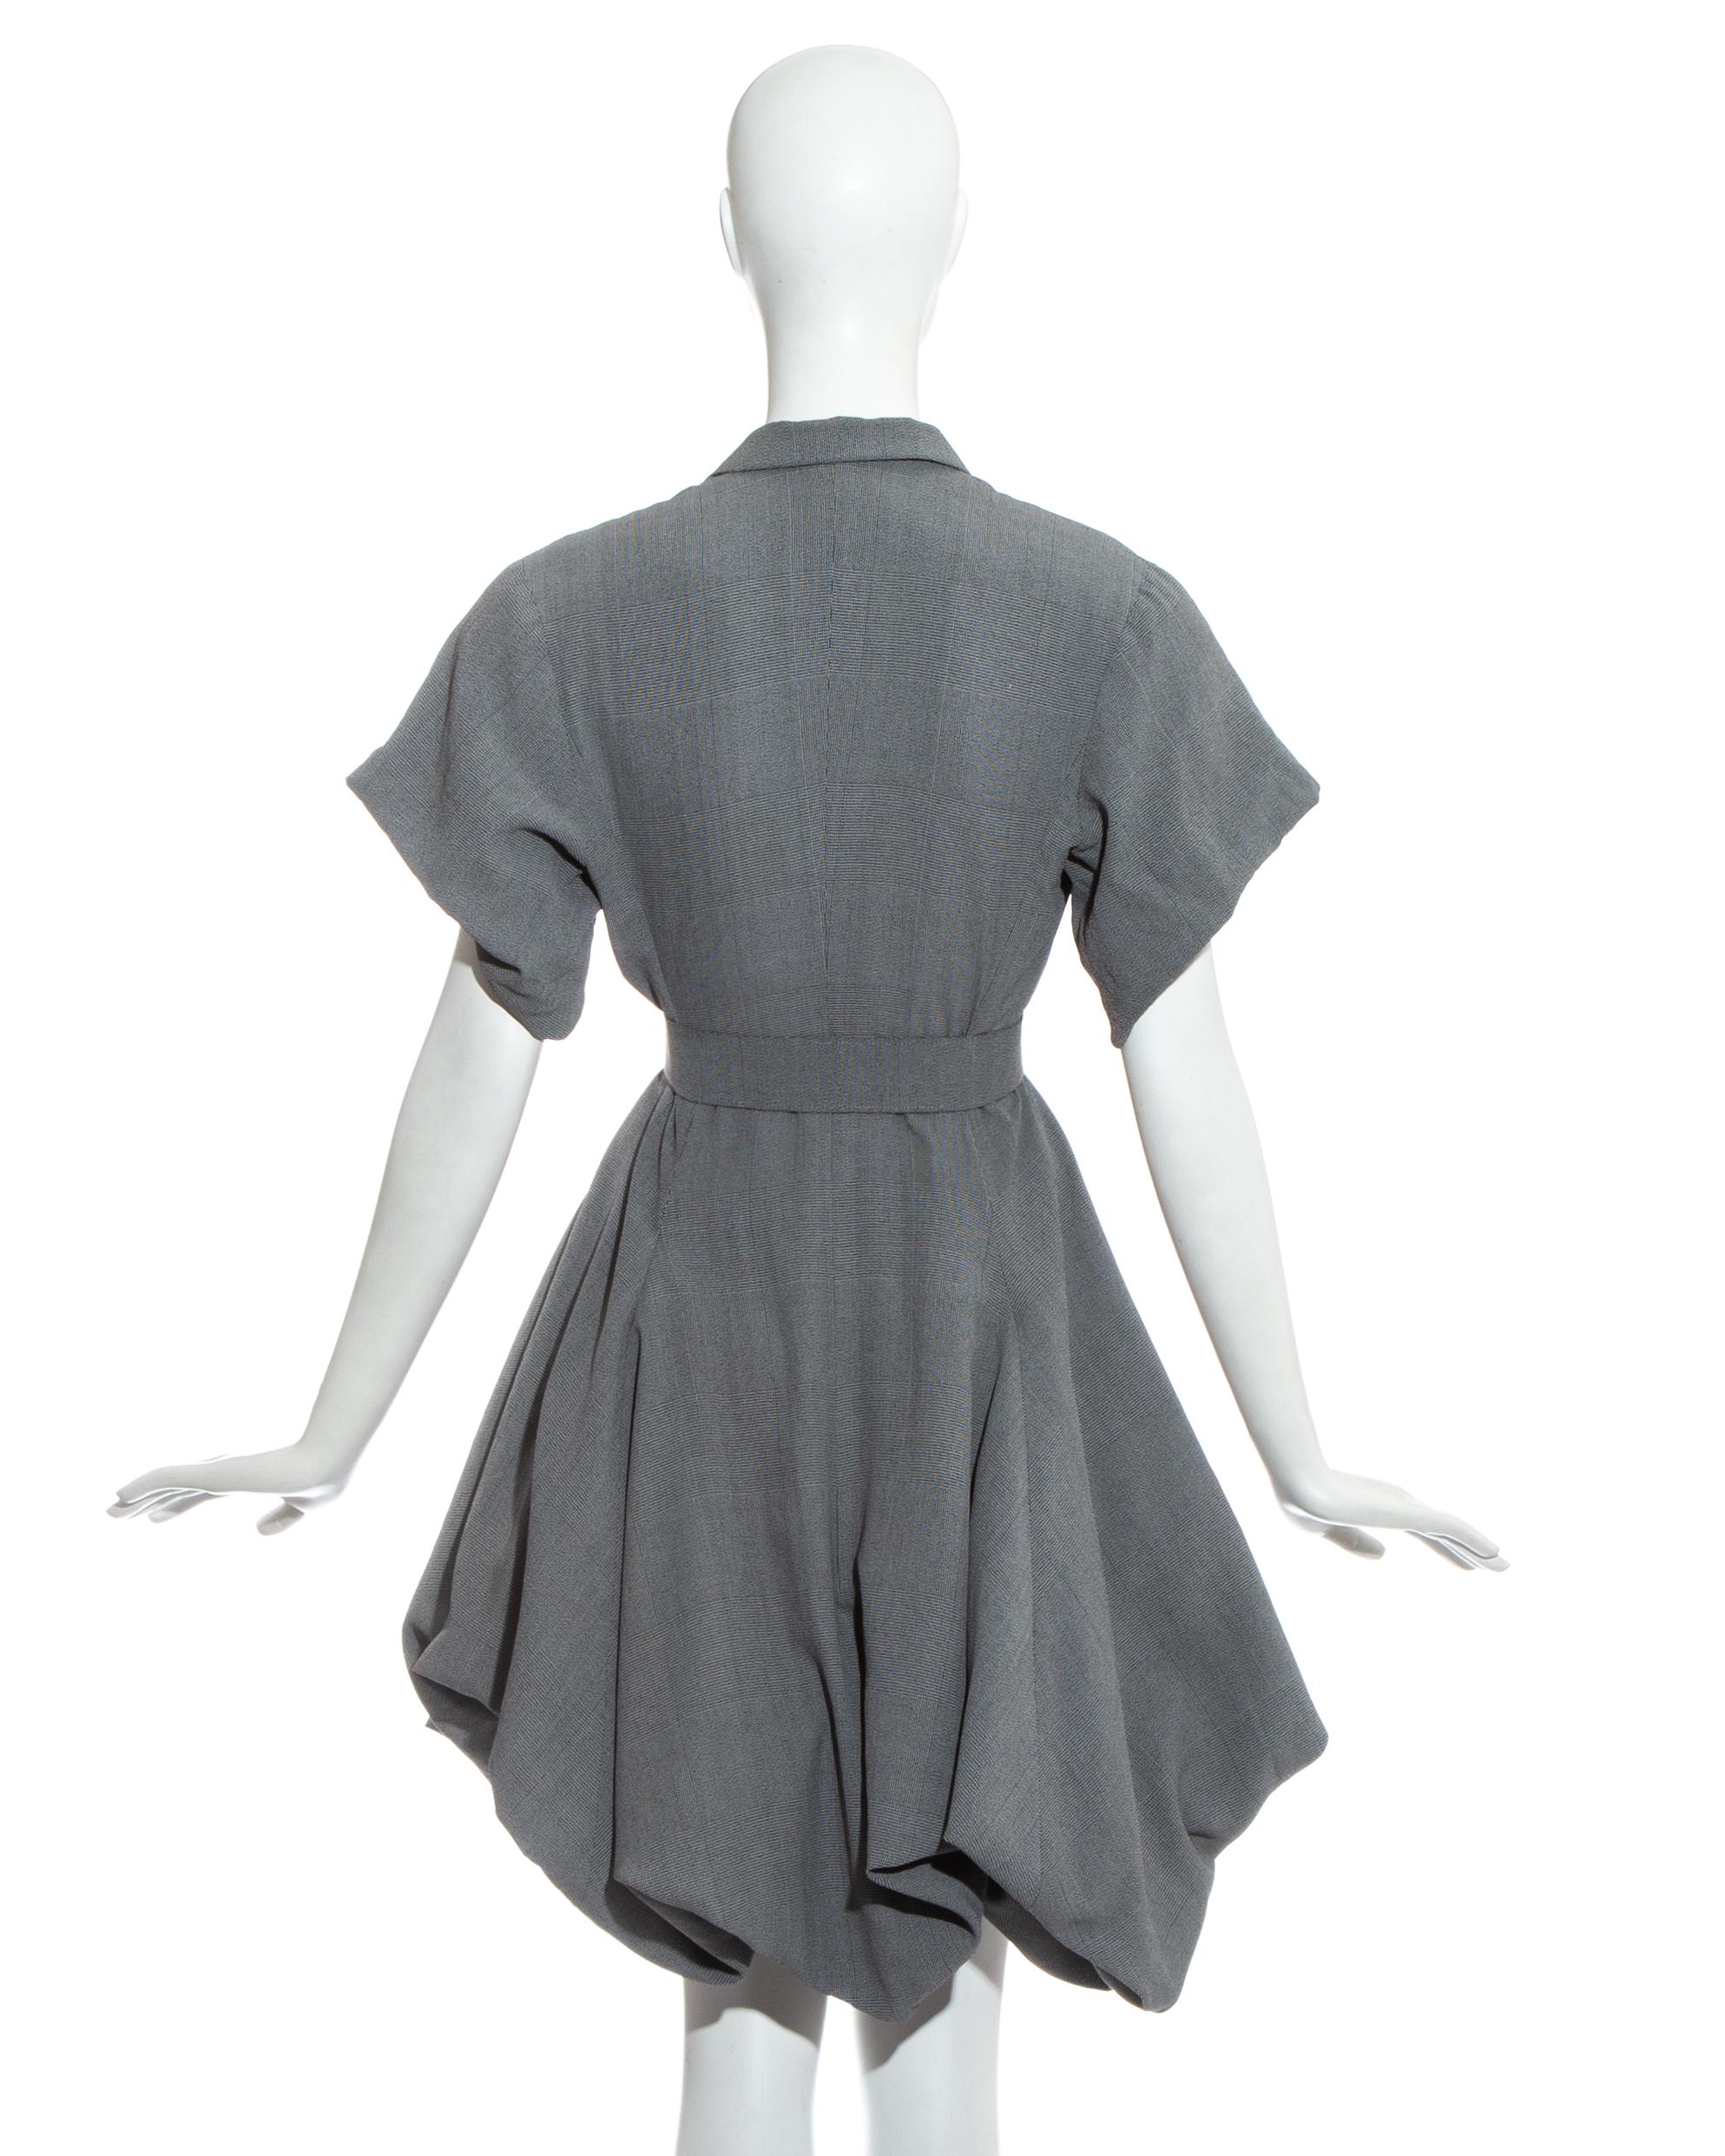 John Galliano grey checked Blanche Dubois bustled coat dress, ss 1988 For Sale 2